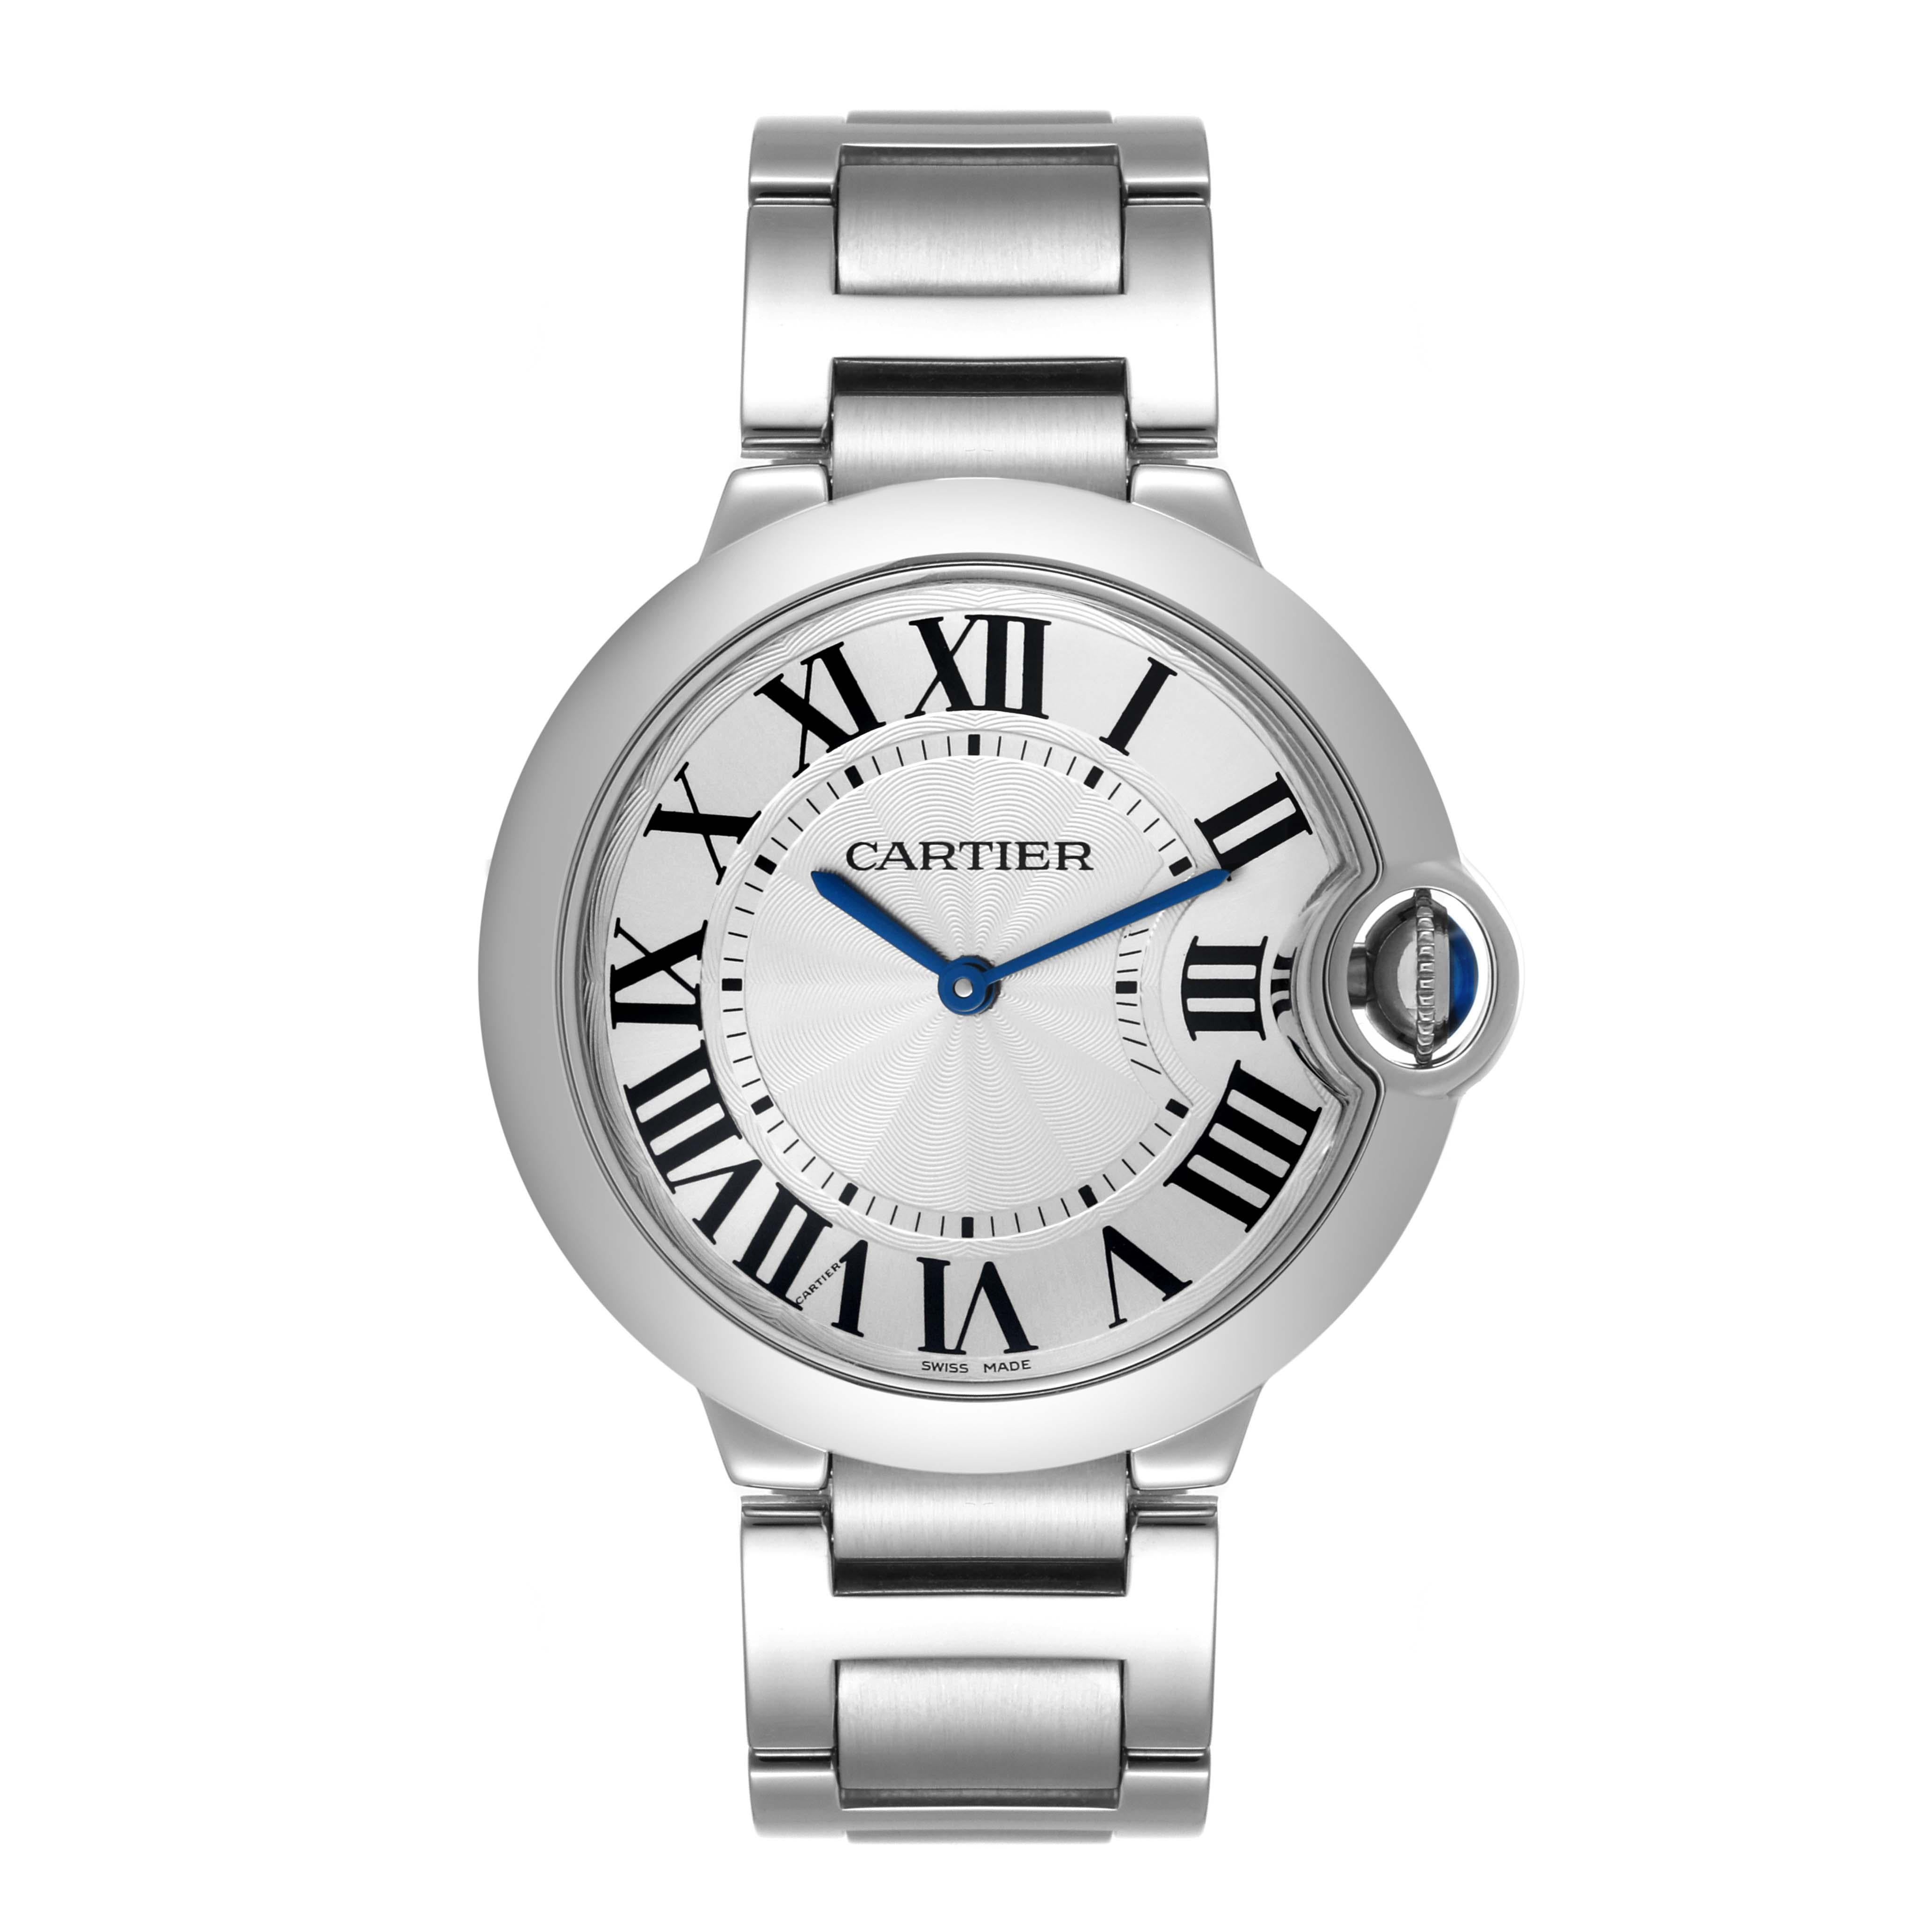 Cartier Ballon Bleu 36mm Silver Guilloche Dial Steel Mens Watch W69011Z4. Quartz movement. Round stainless steel case 36 mm in diameter. Fluted crown set with blue spinel cabochon. Stainless steel smooth bezel. Scratch resistant sapphire crystal.